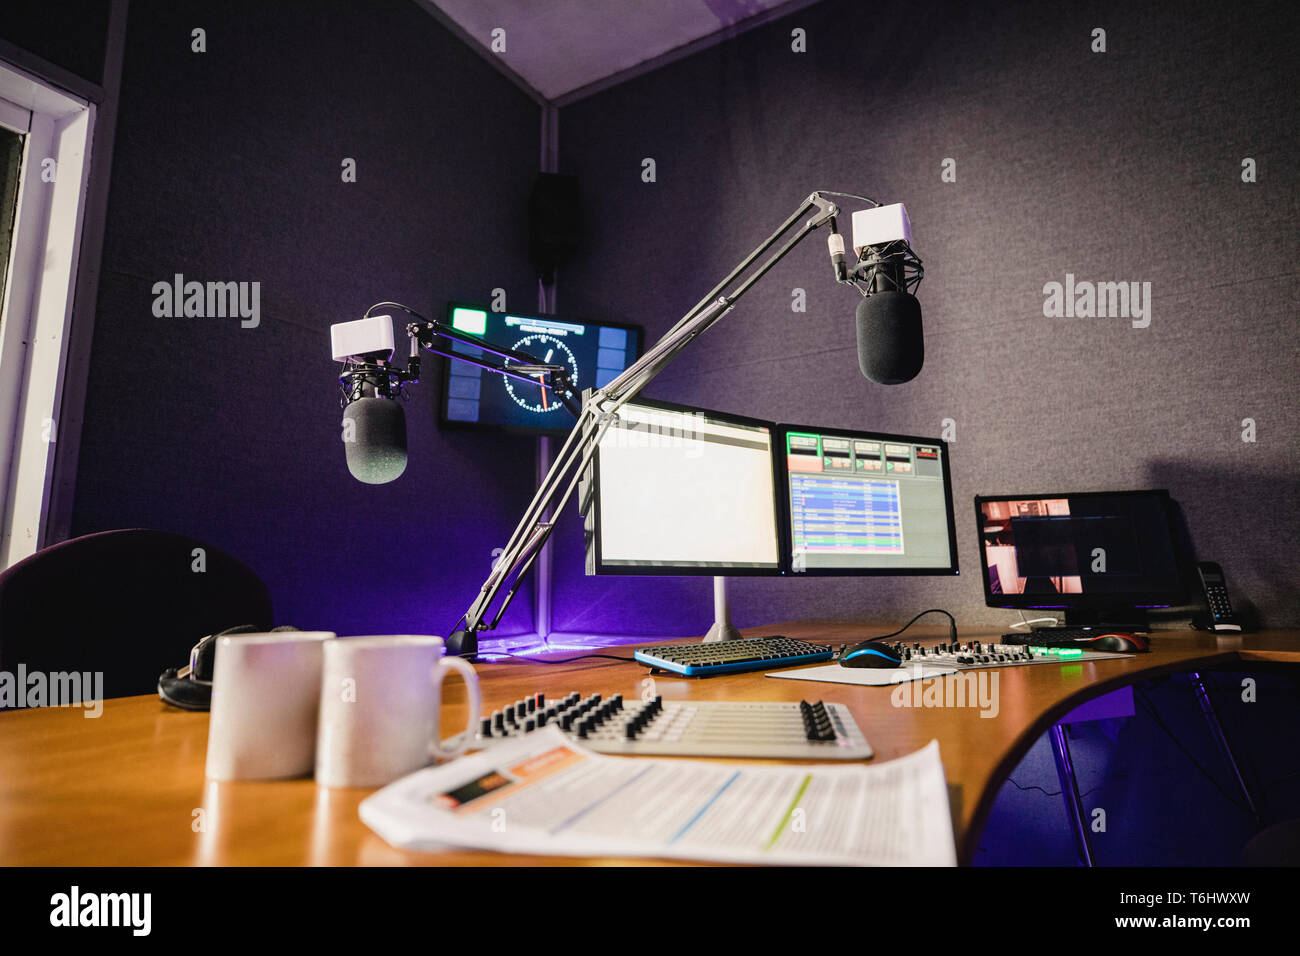 A Front View Shot Of A Radio Station Studio Interior A Large Desk